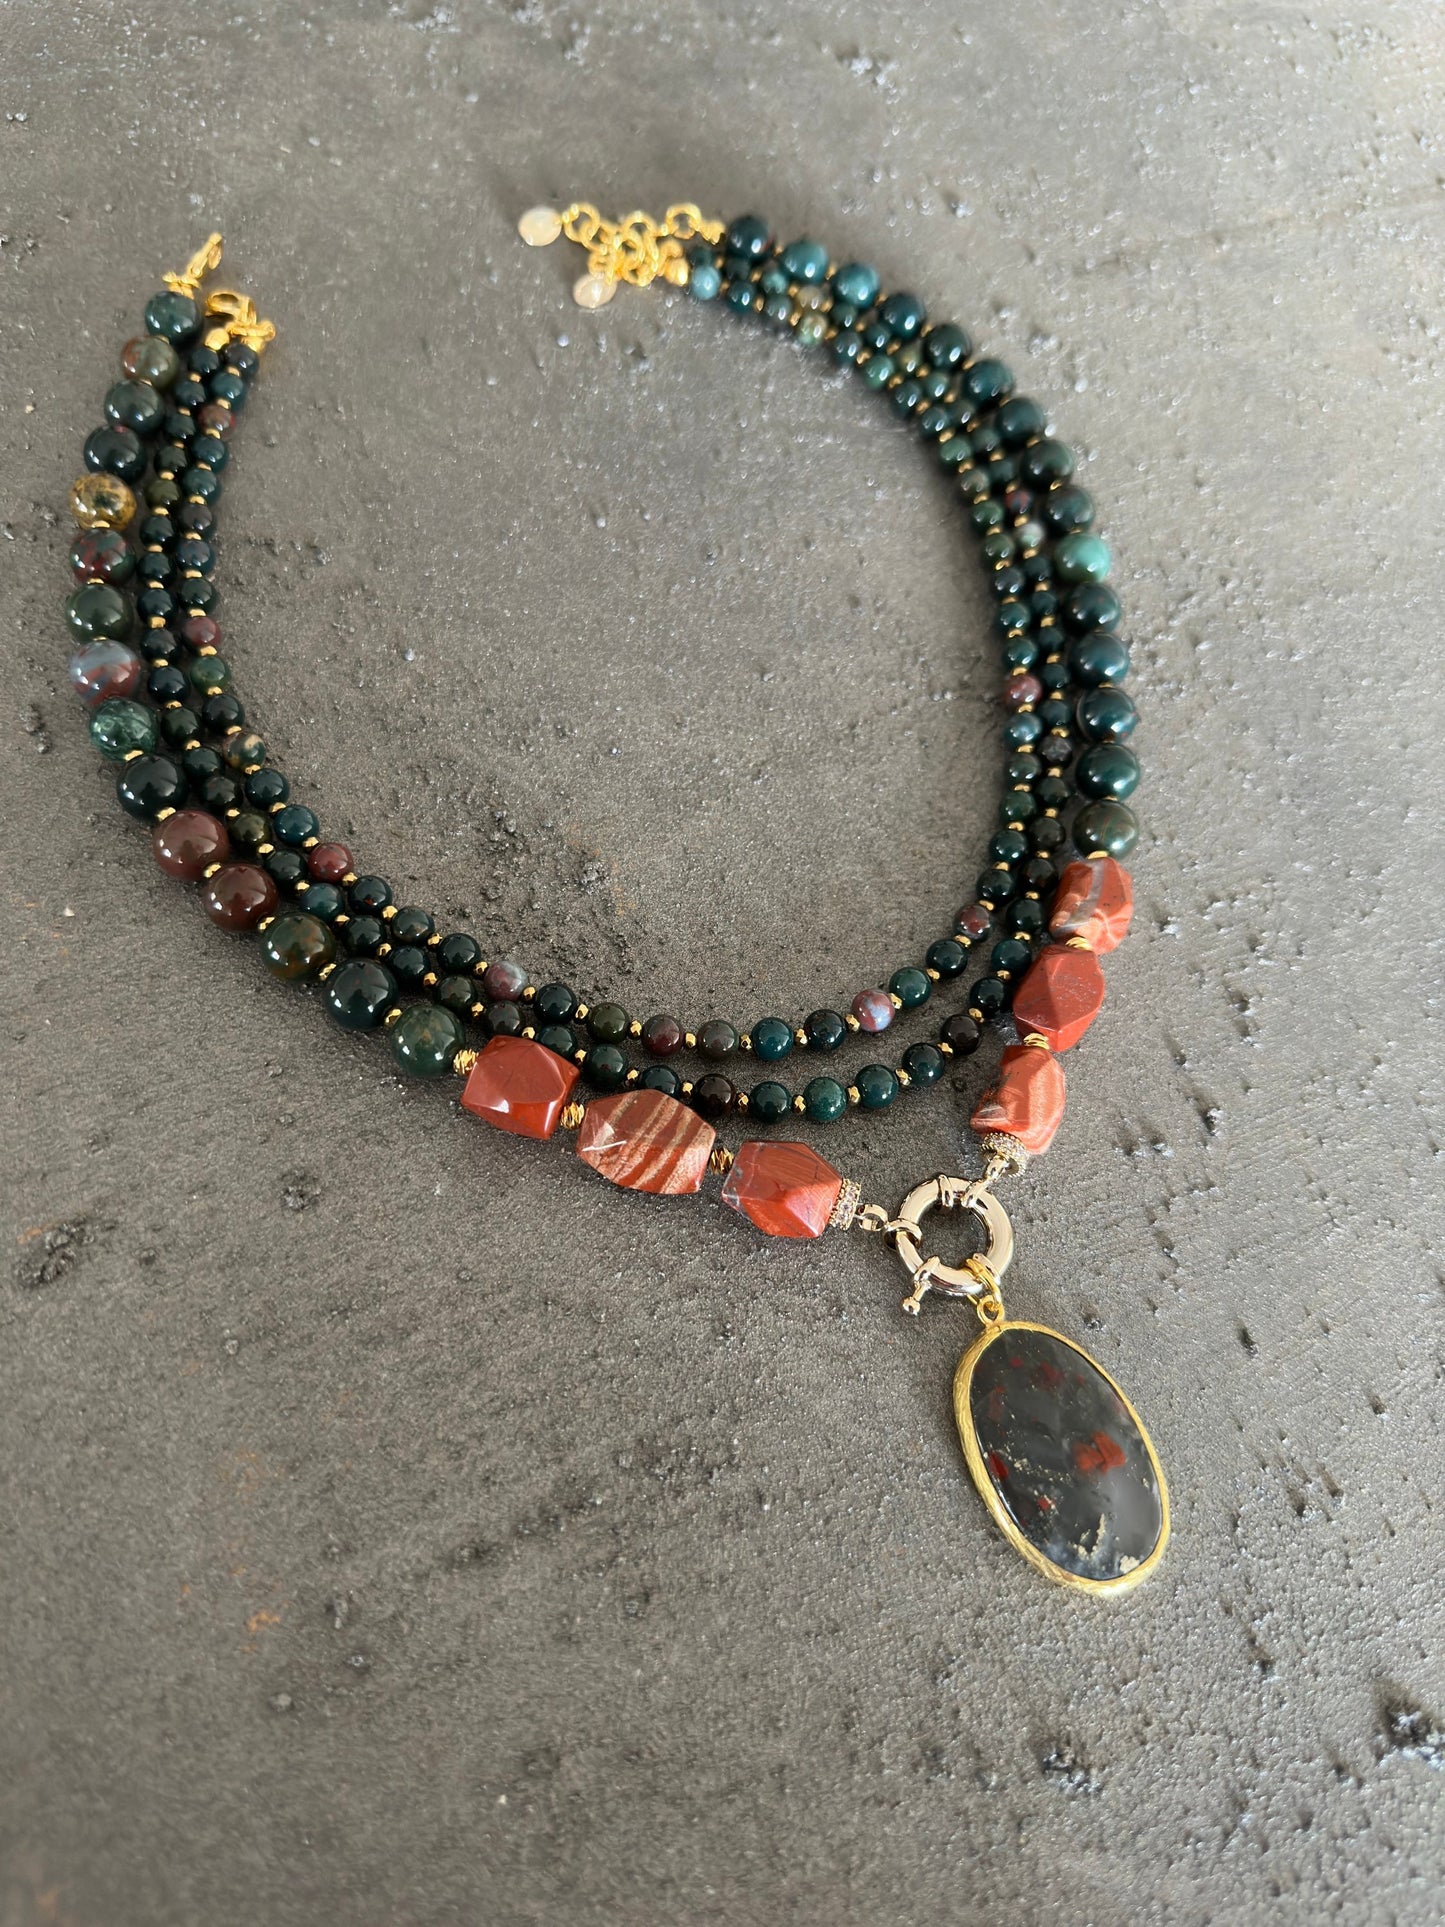 Blood Stone Necklace, Dark Green Multistrand Jewelry for Special Gifts, Handmade Jasper Statement Neclace, Beaded Gemstone Gifts